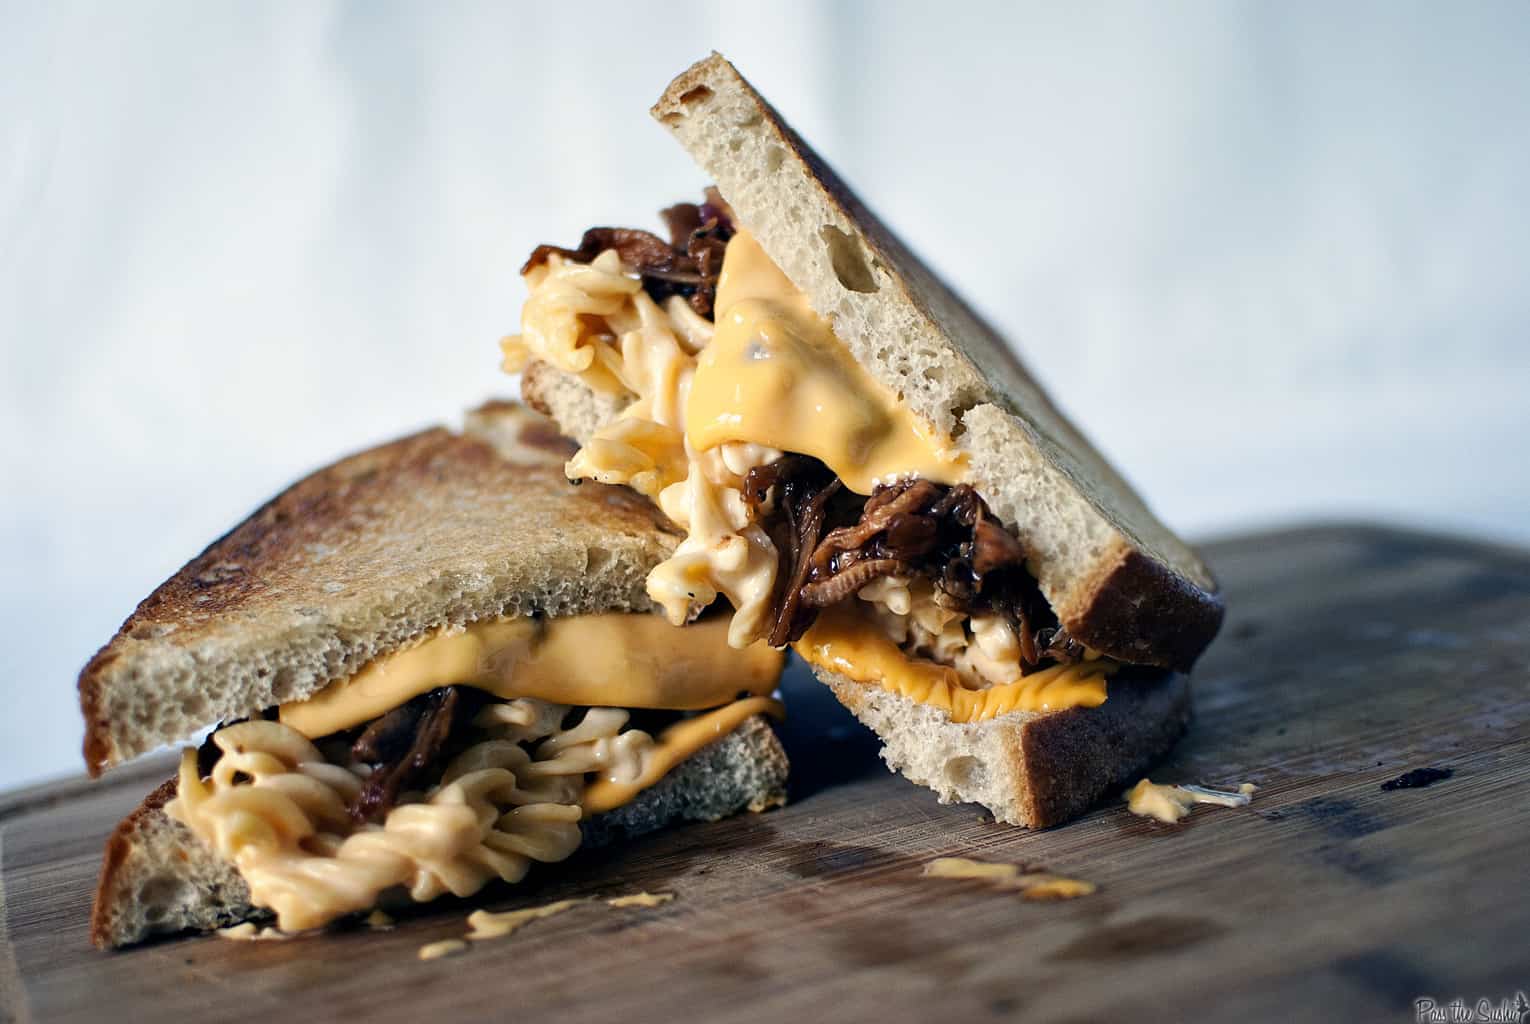 The Man-wich is a grilled mac and cheese with pulled pork. A carb lover's sandwich from Pass the Sushi.